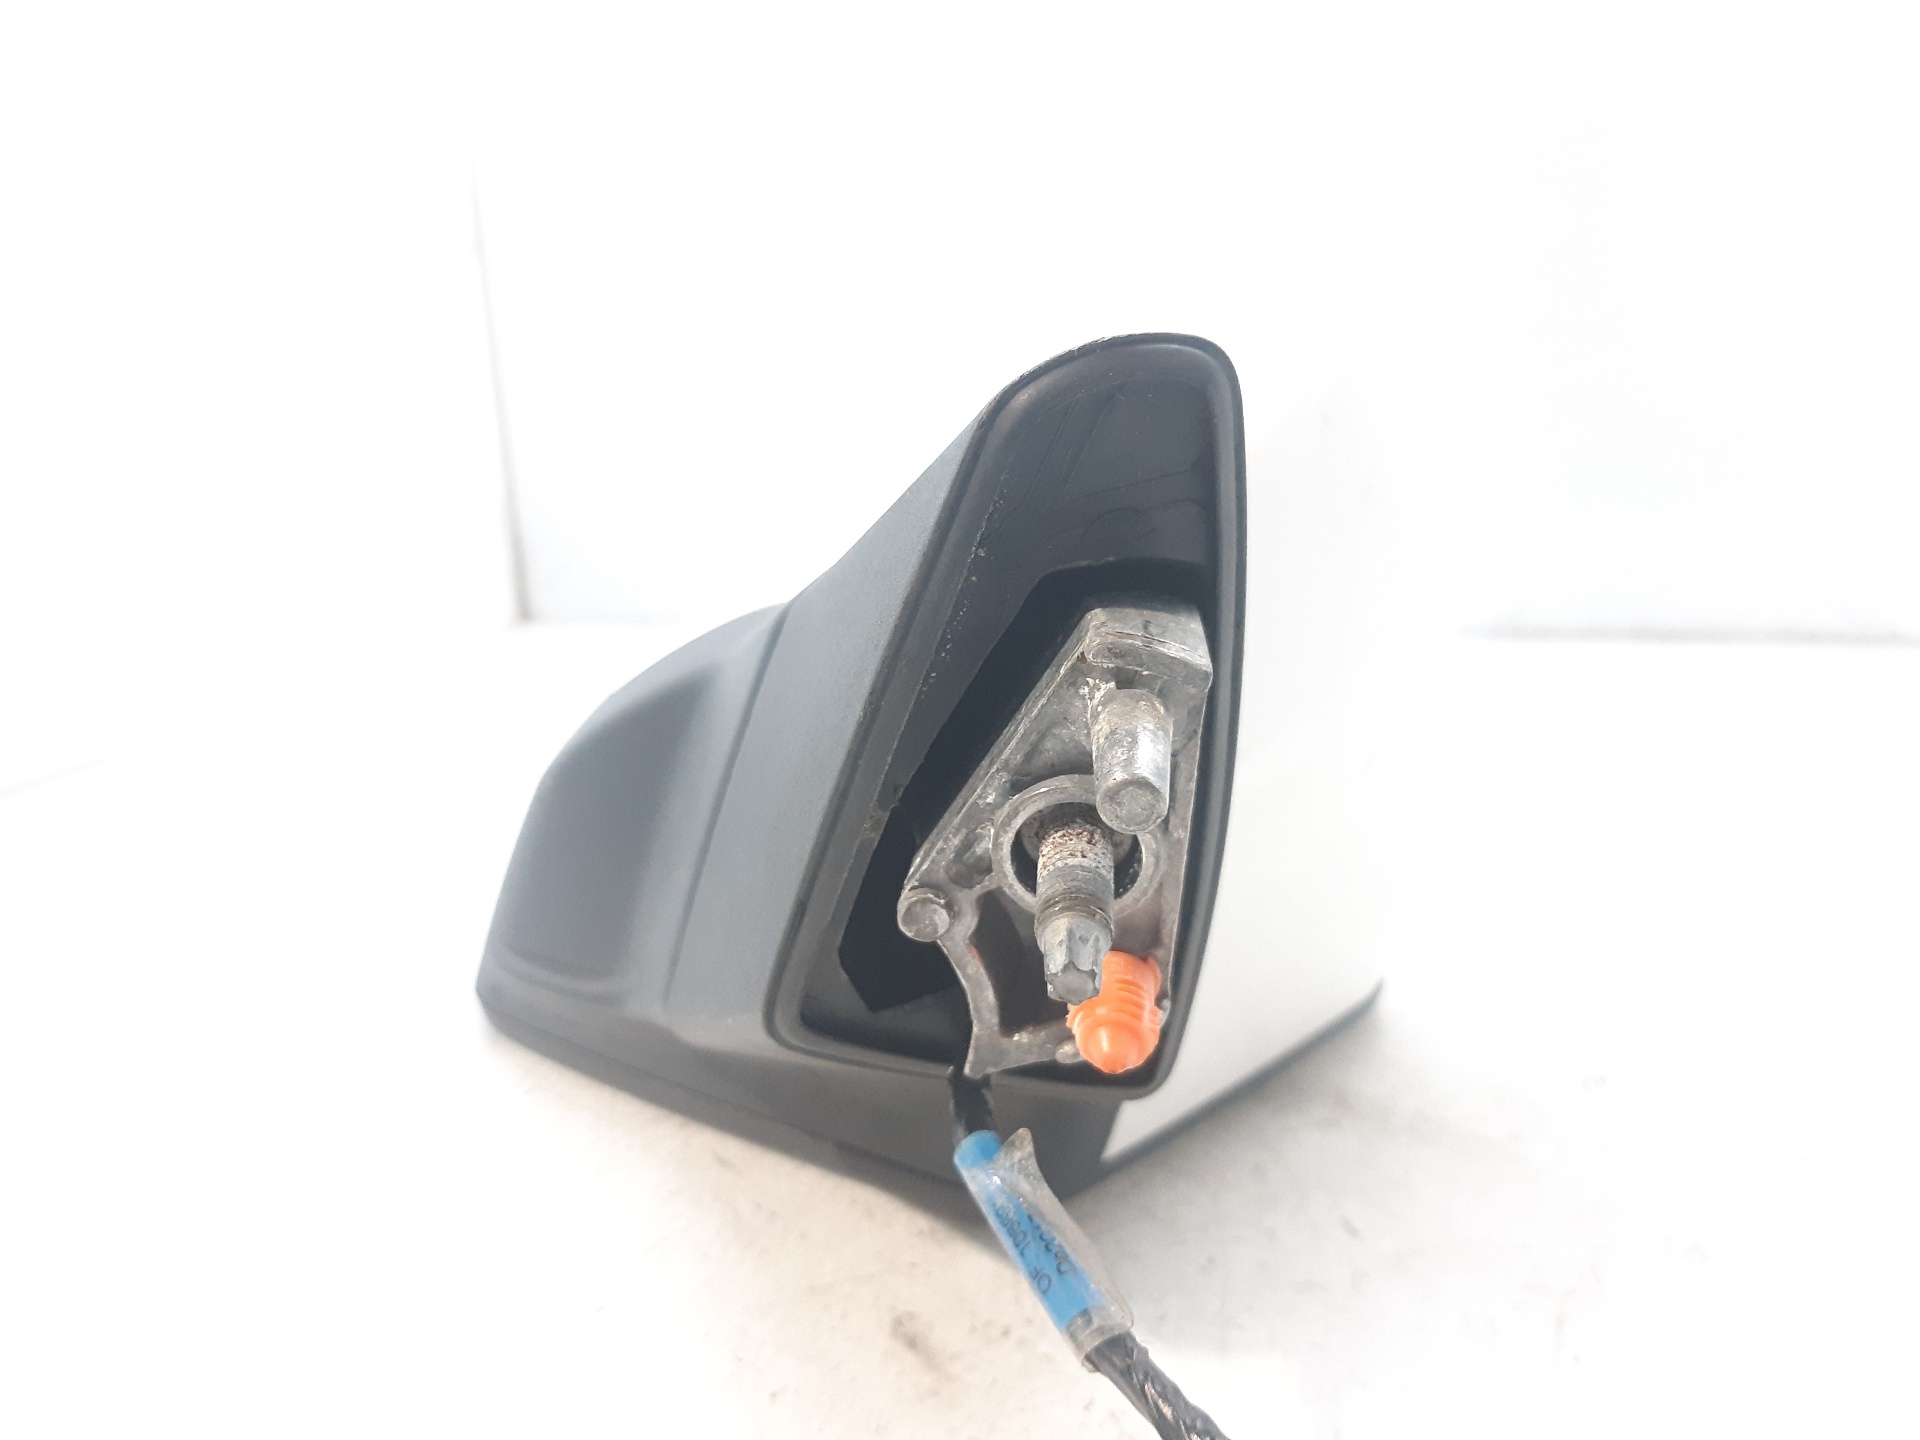 SEAT Leon 3 generation (2012-2020) Right Side Wing Mirror 5F1857508N 22030456